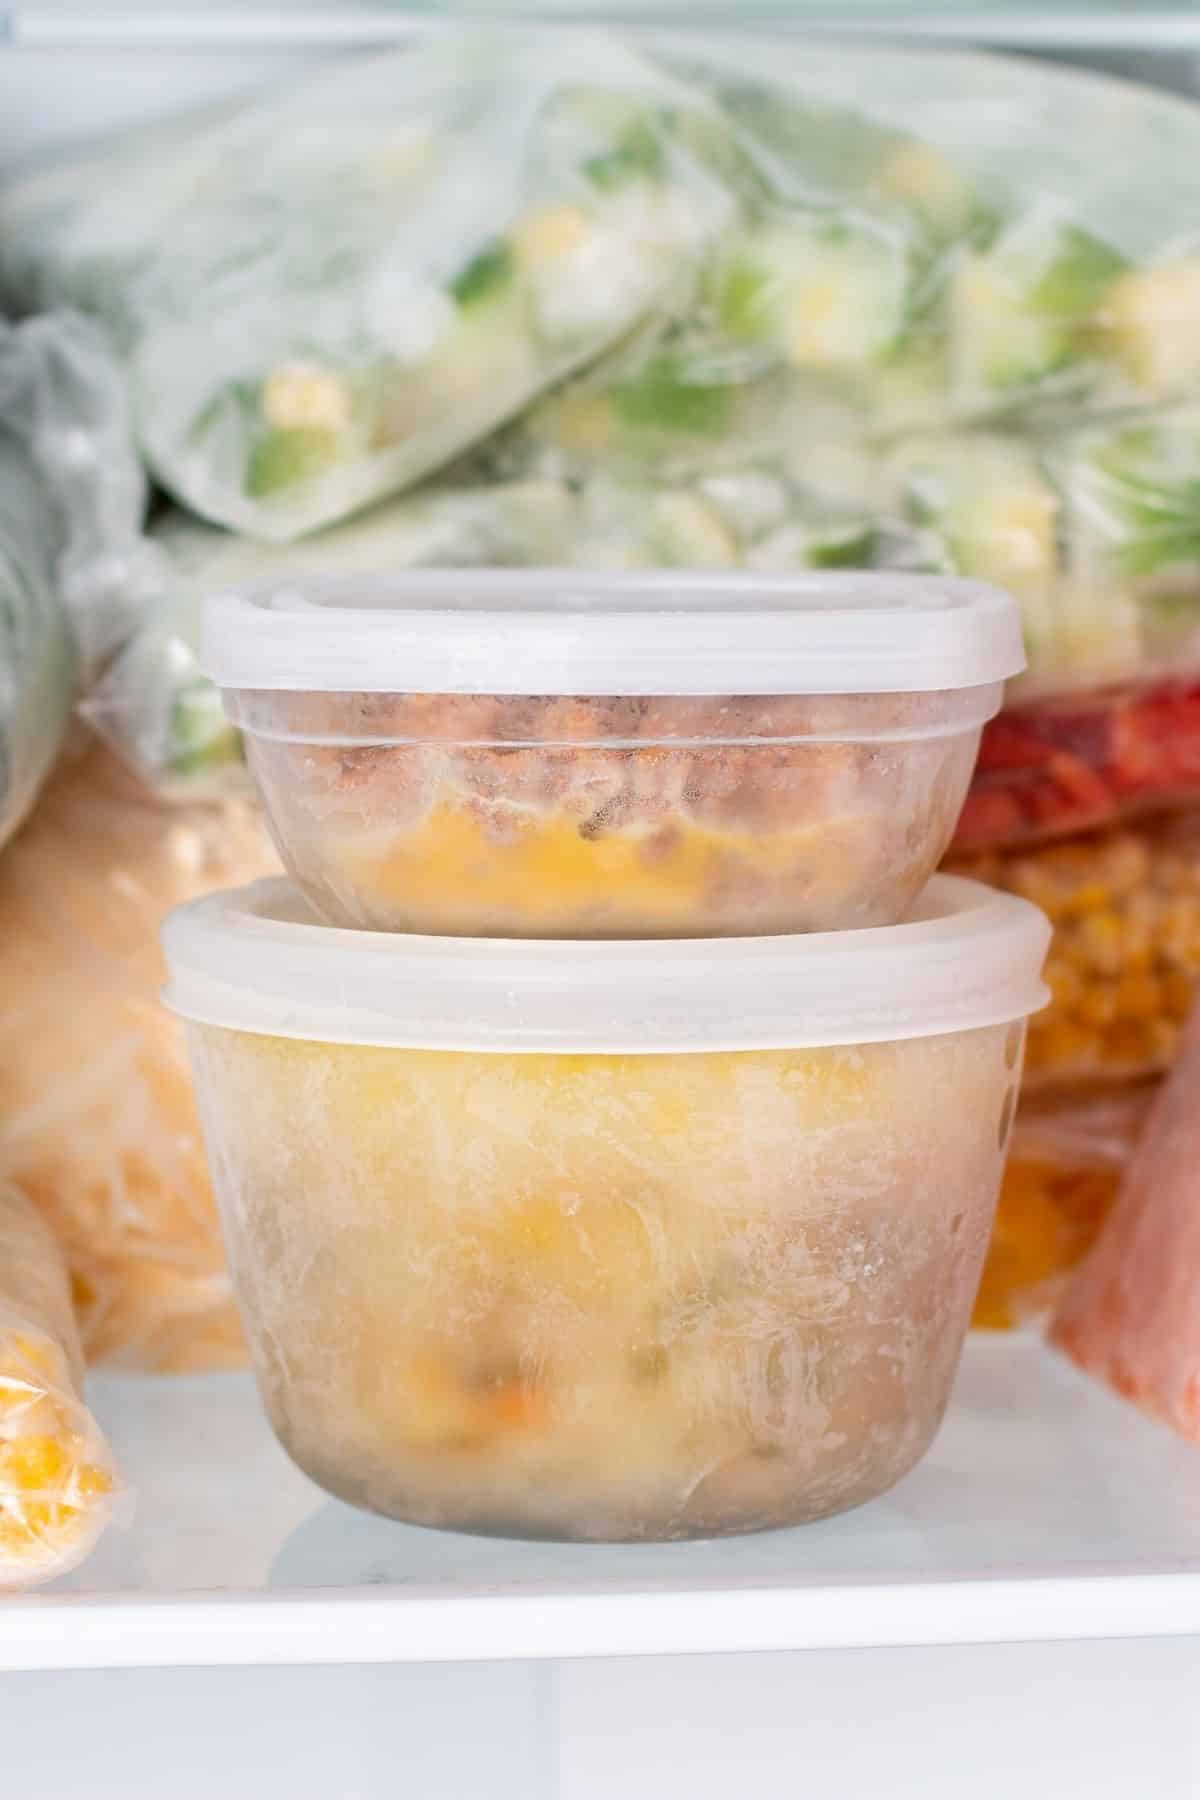 two containers in a freezer.